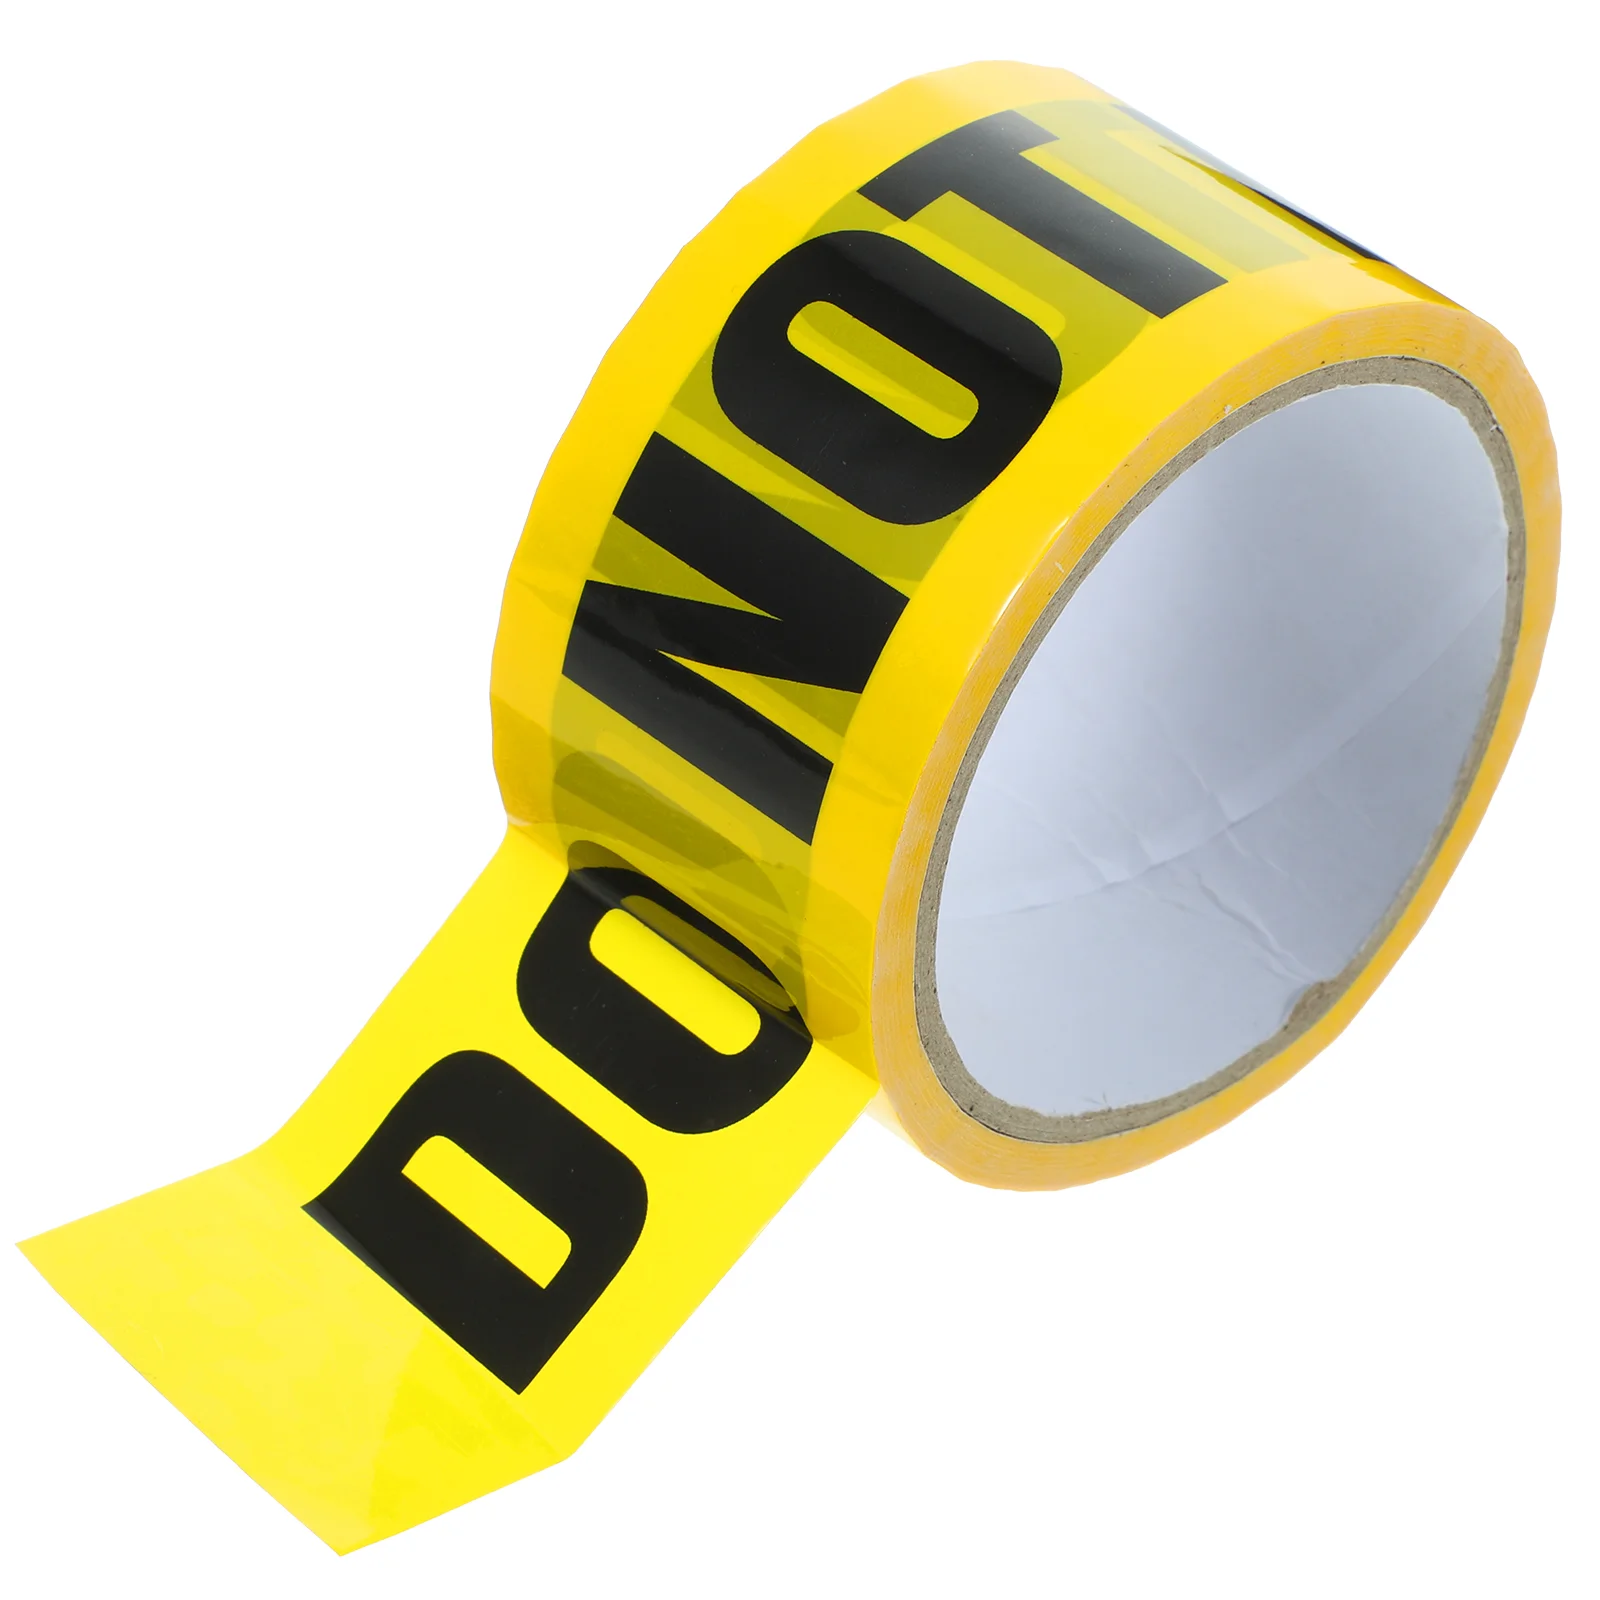 

Halloween Decor Masking Tape Yellow Caution Tape Thank You Keep Out Do Not Enter Warning Danger Tape Roll